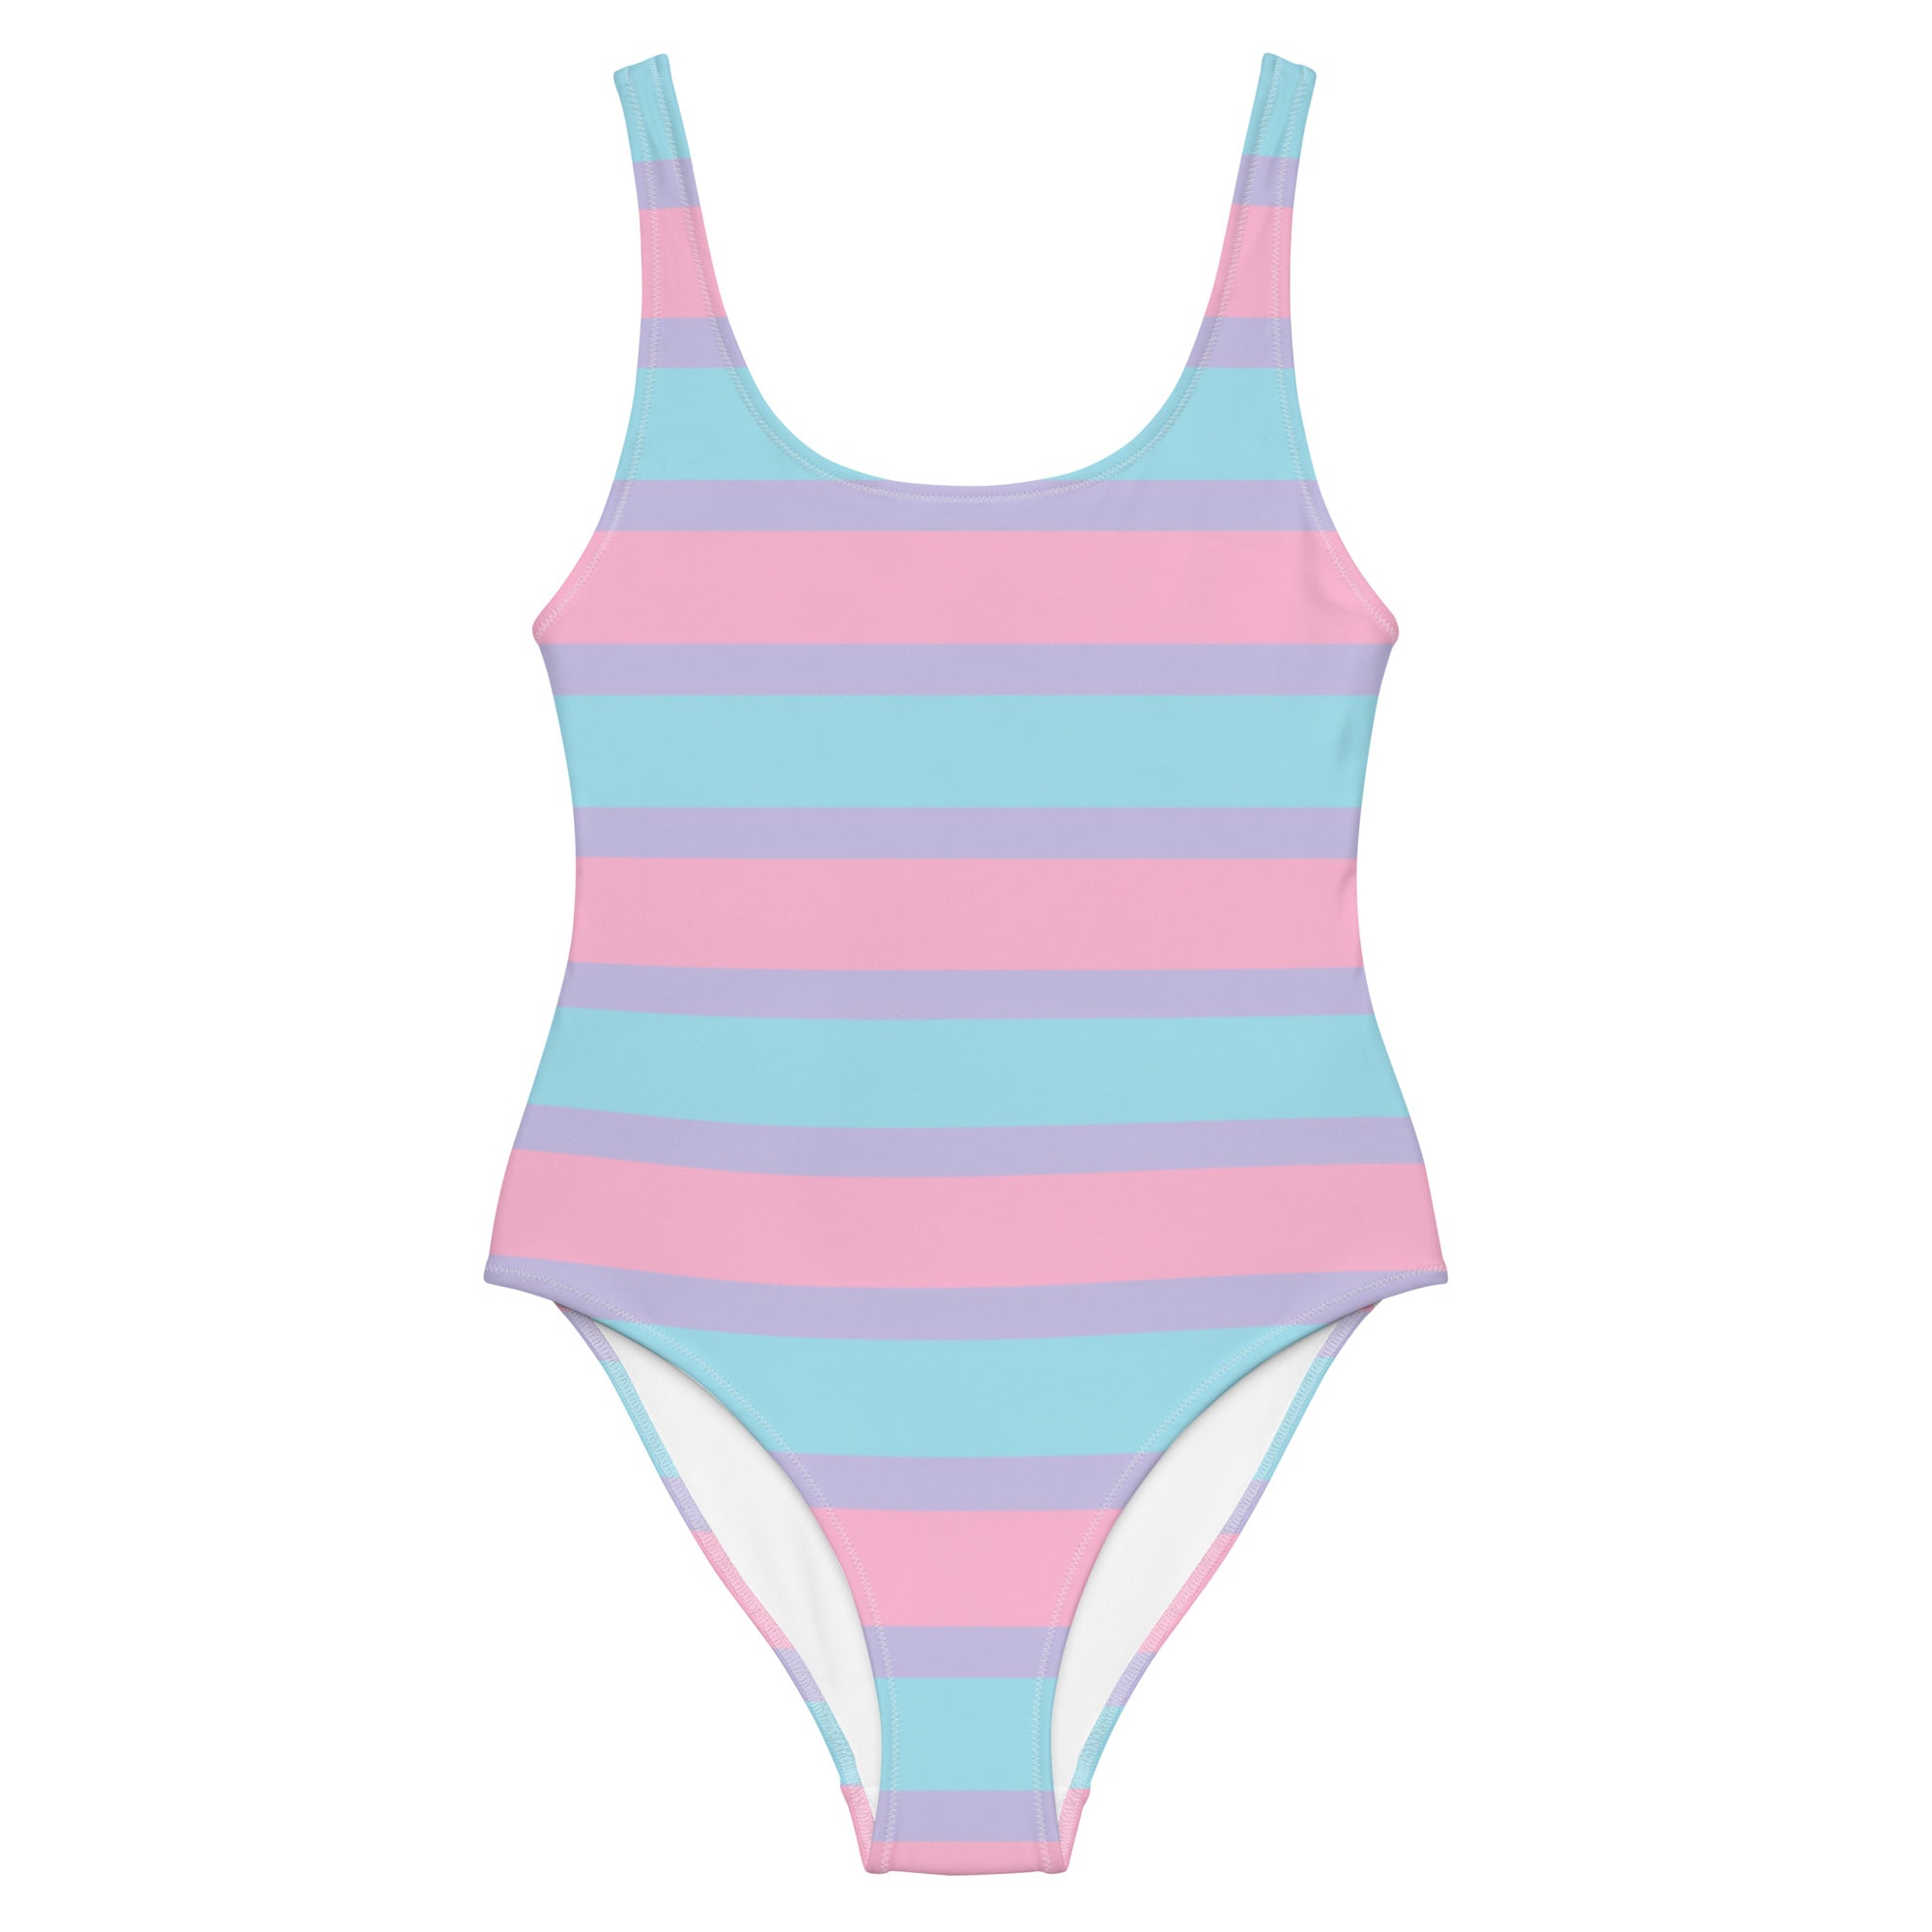 Pastel Bisexual One-Piece Swimsuit